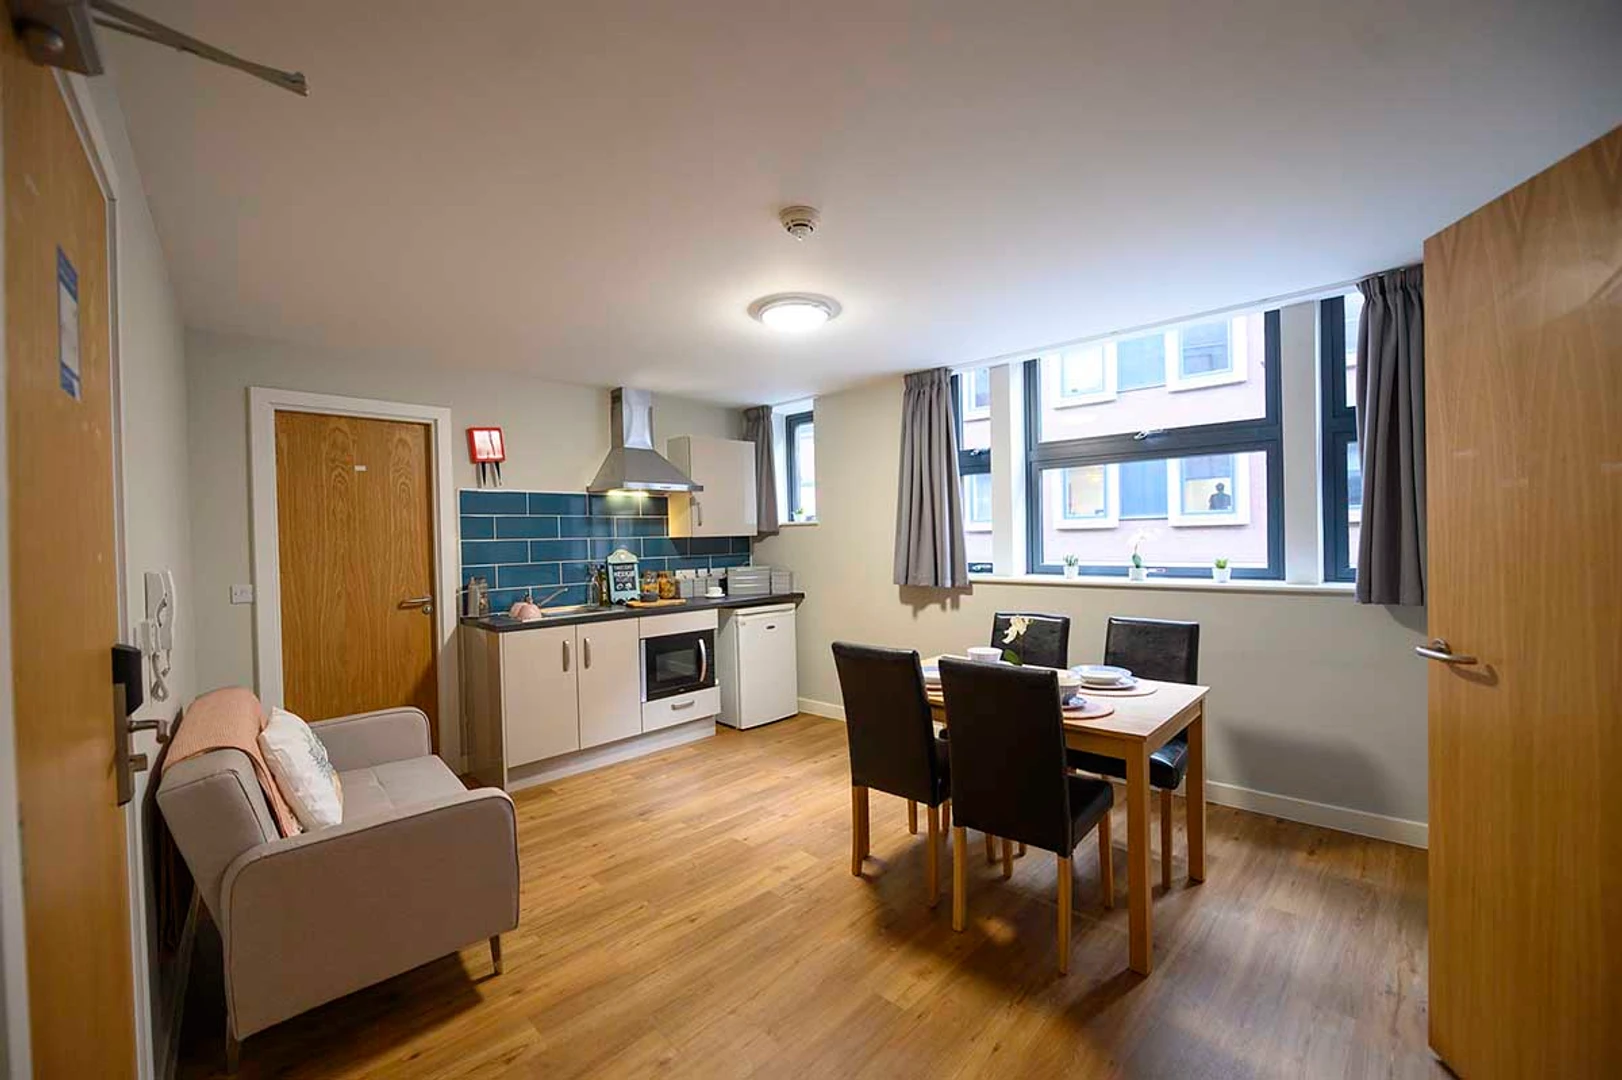 Accommodation in the centre of Sheffield